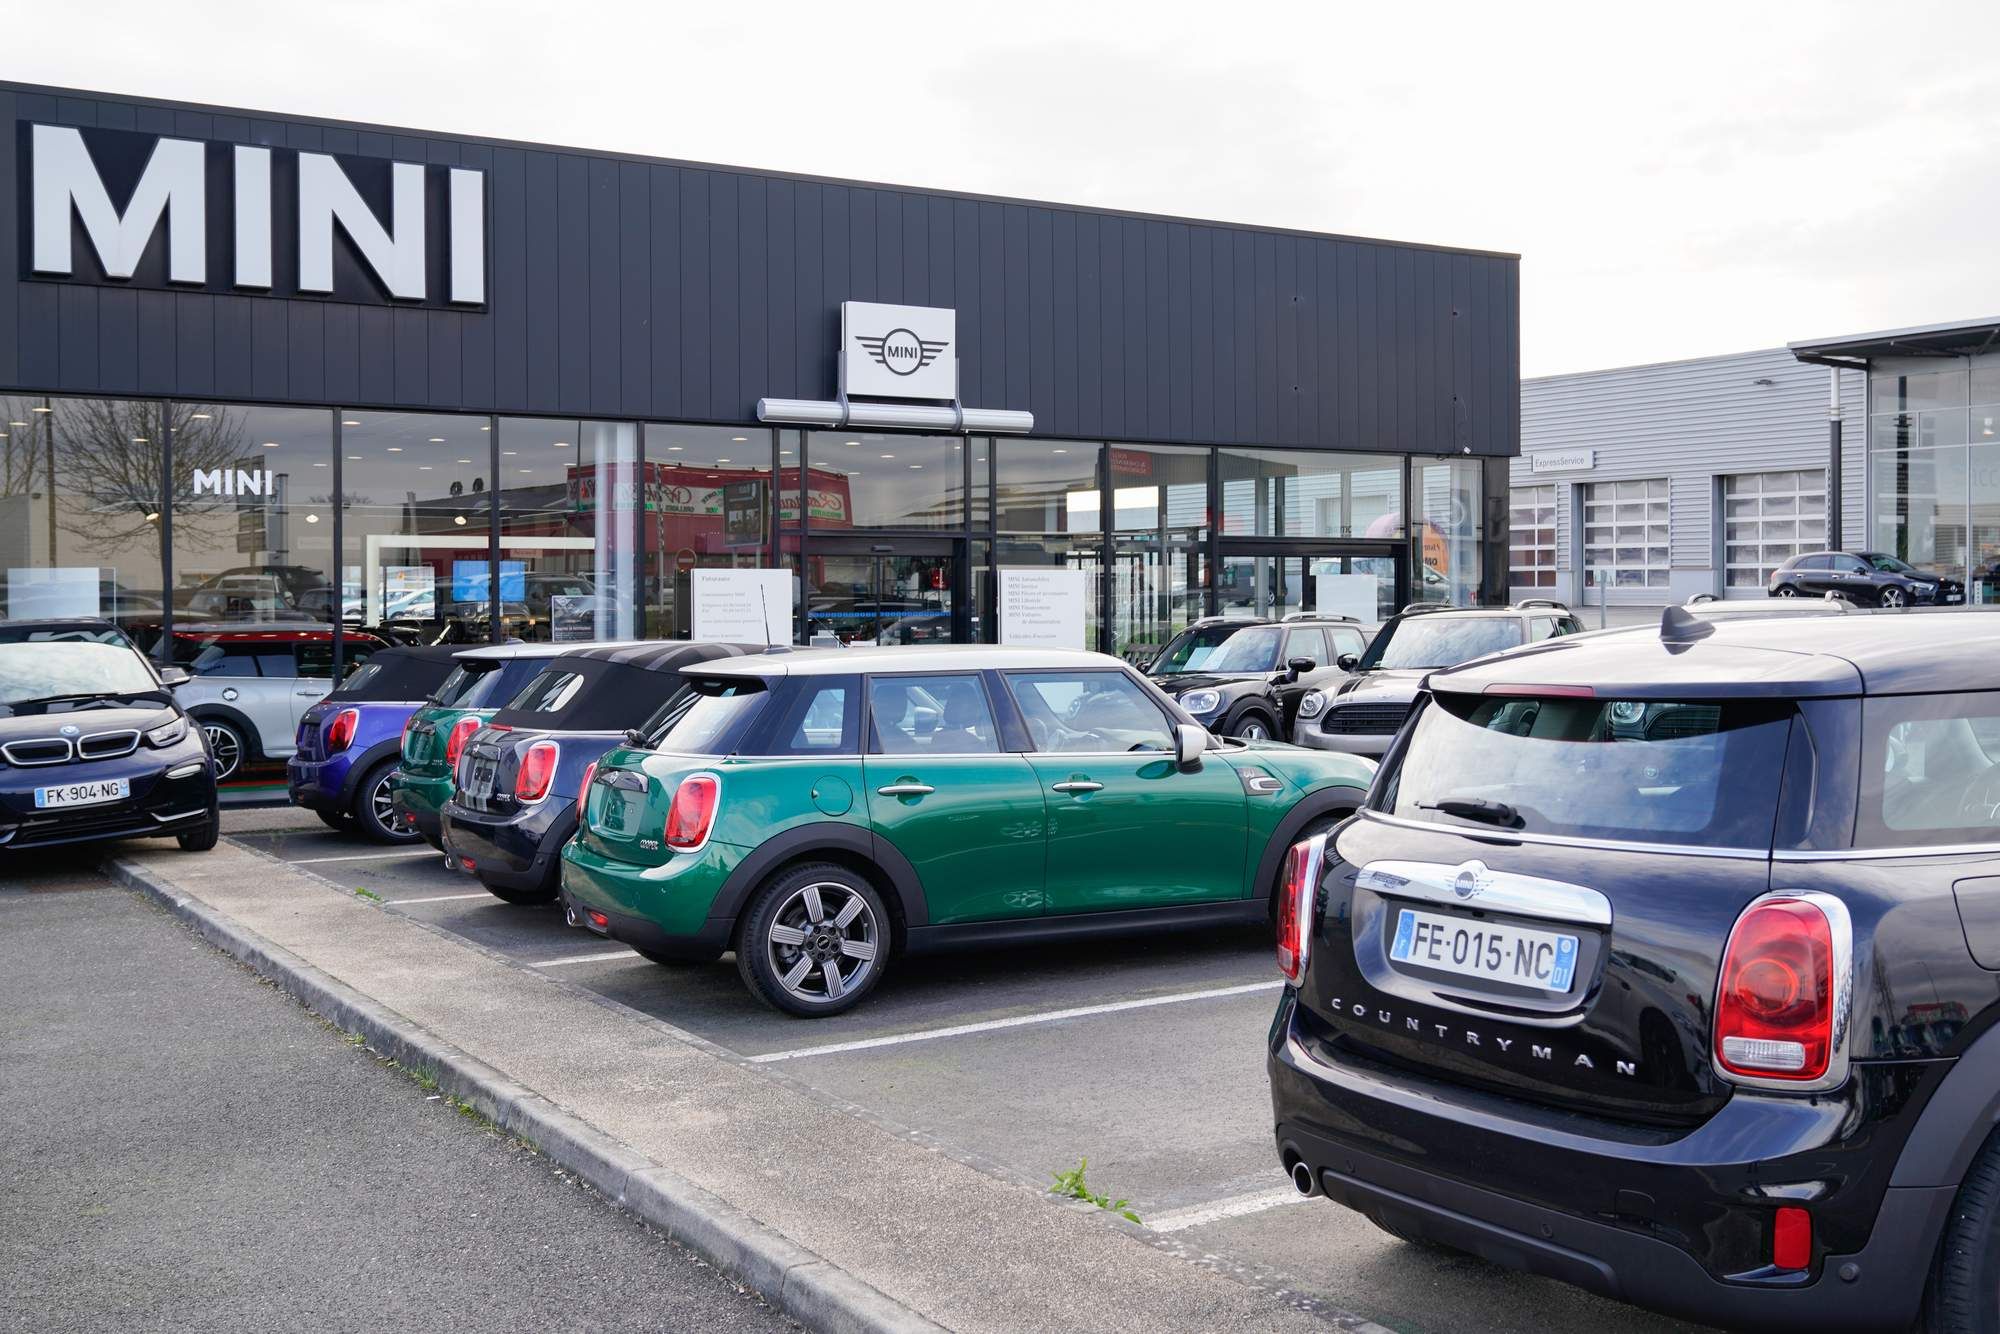 MINI Cooper dealership regarding the class action lawsuit certified against the car maker over power steering defects